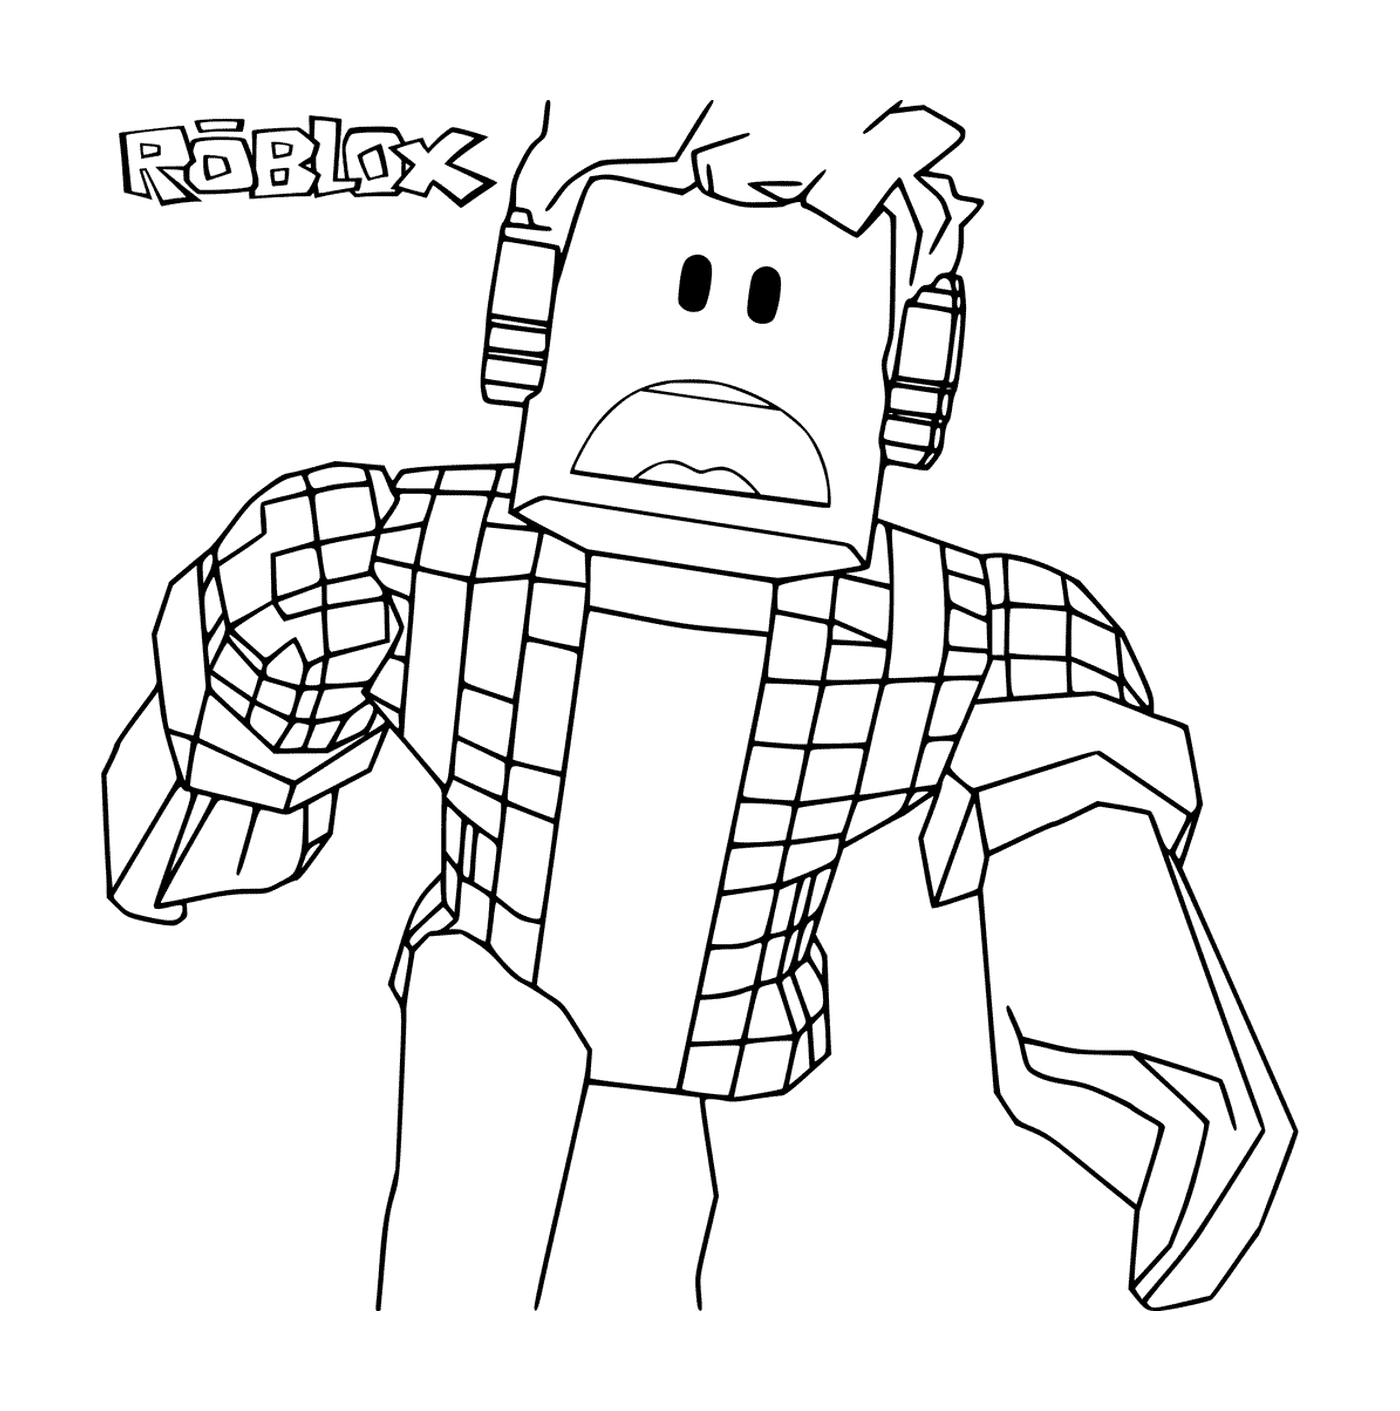   Personnage effrayant Roblox 